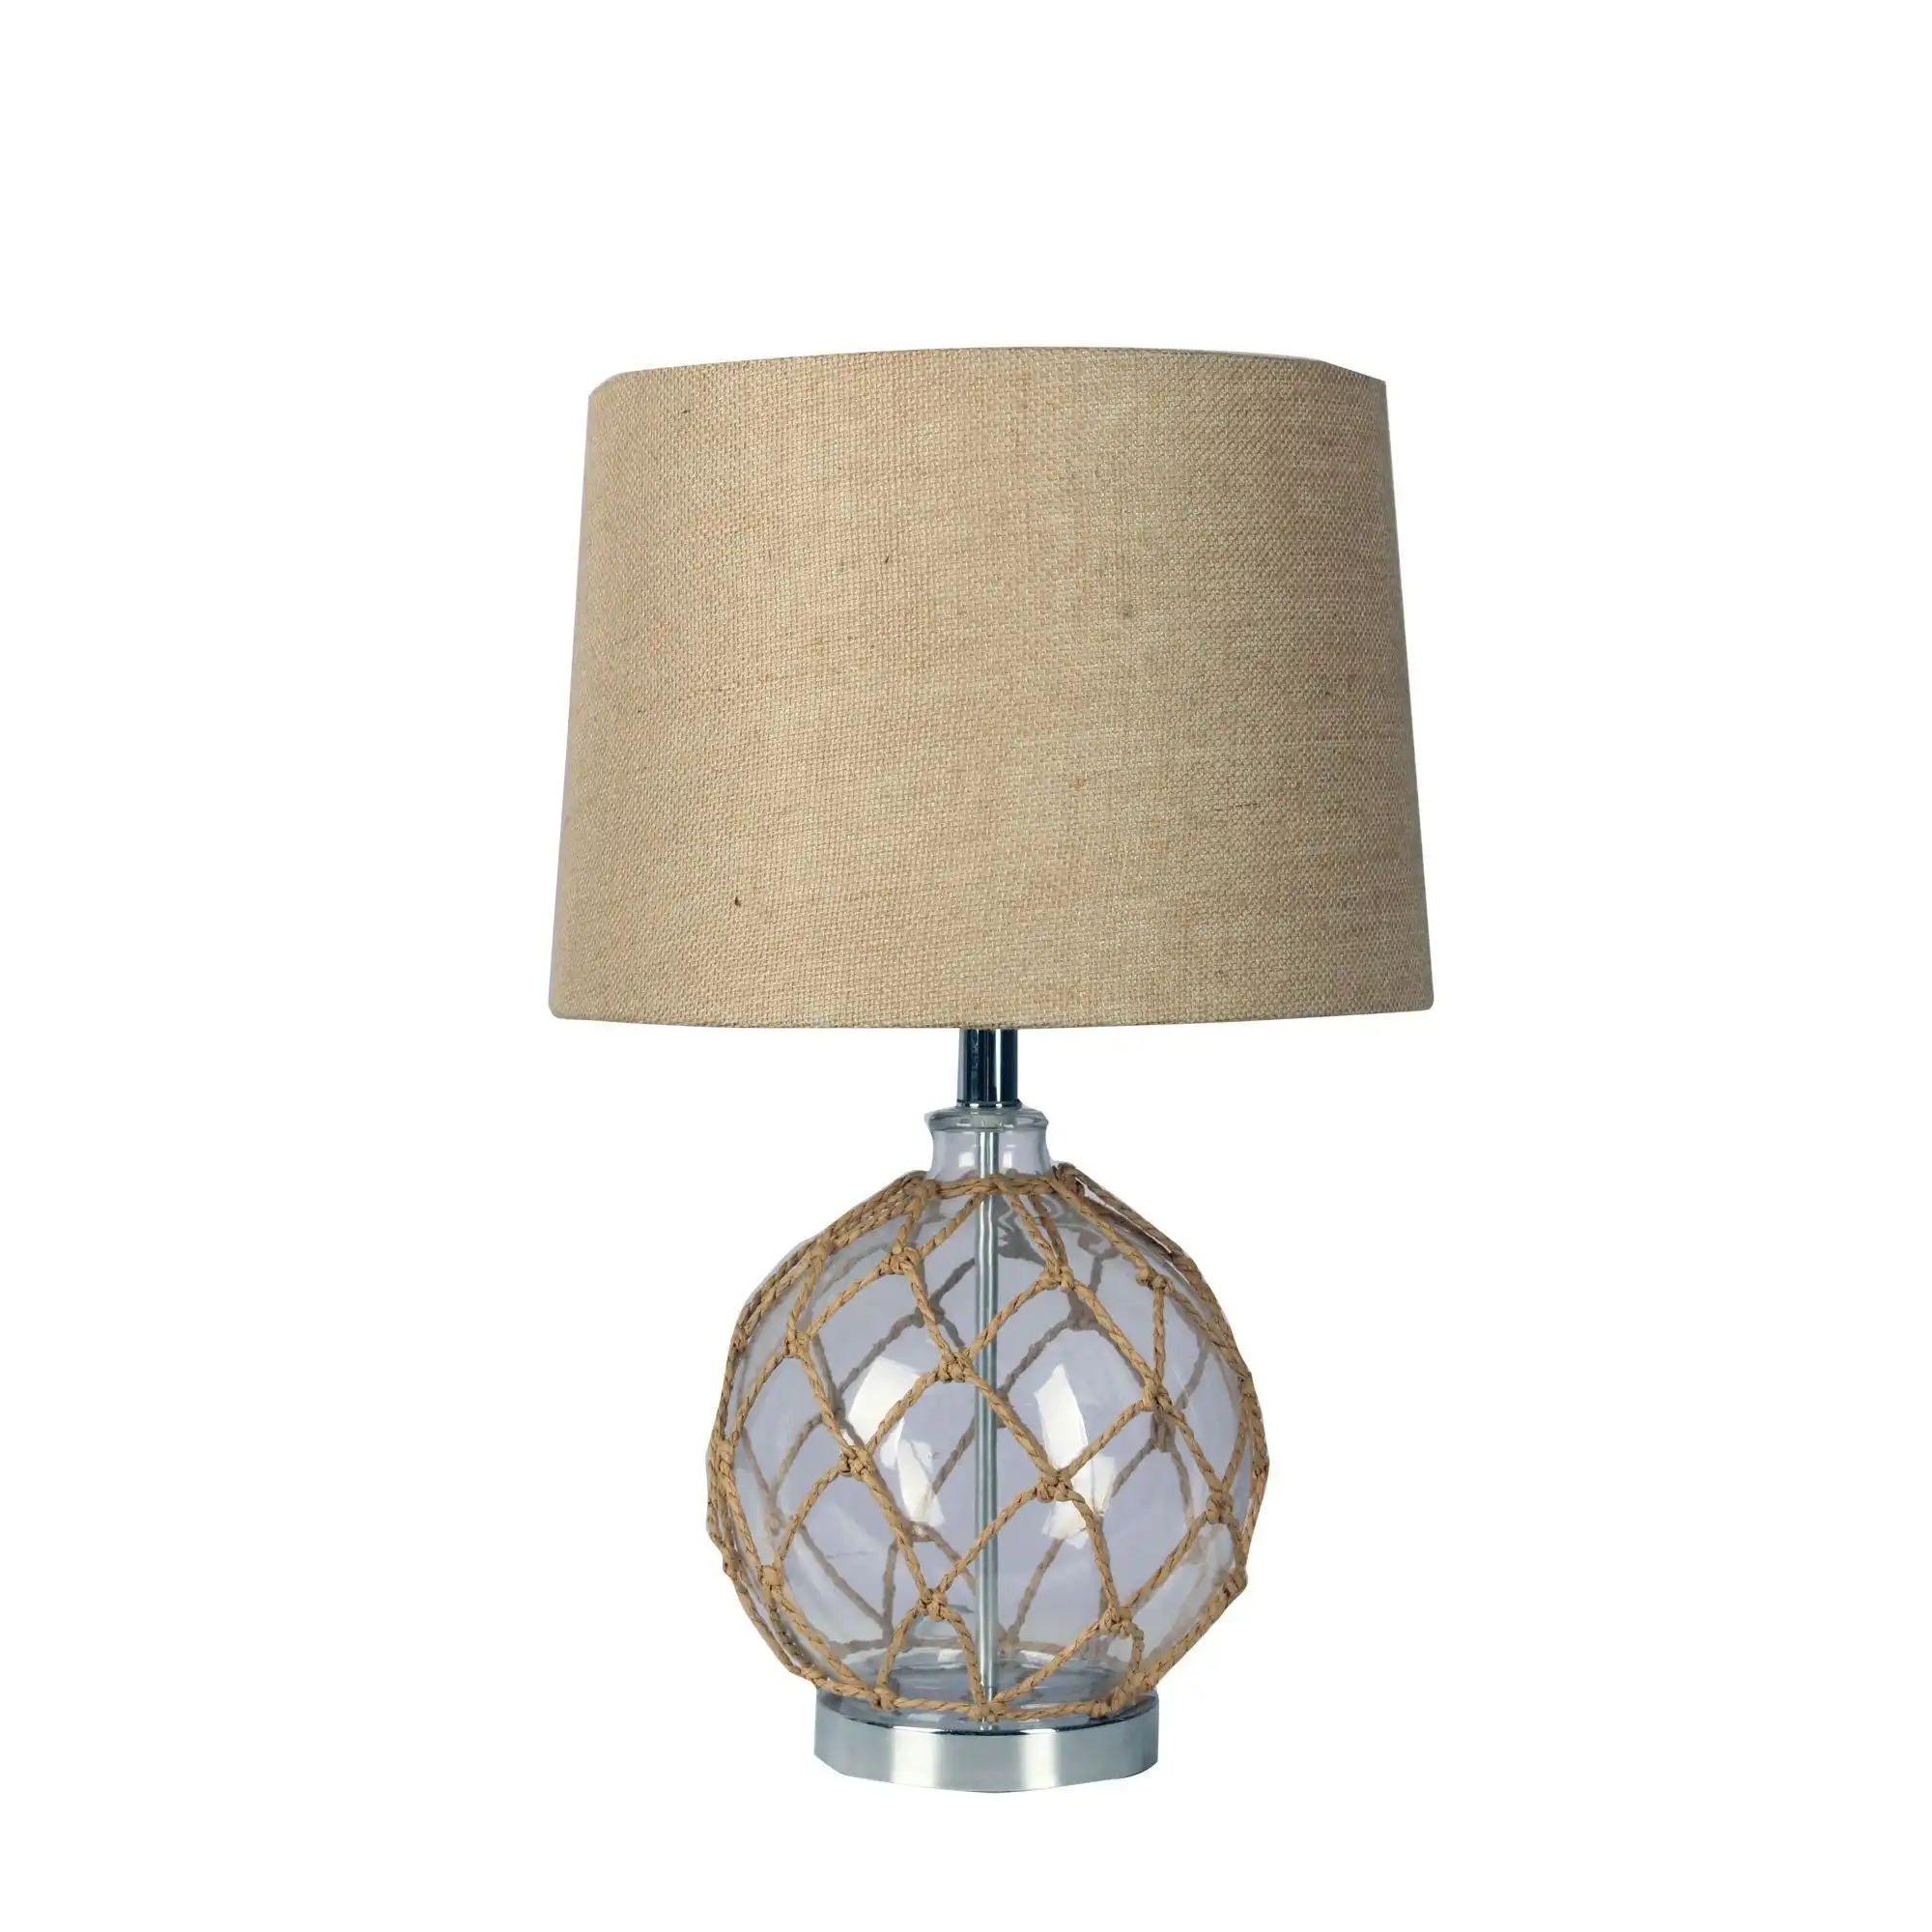 YAMBA Complete Table Lamp